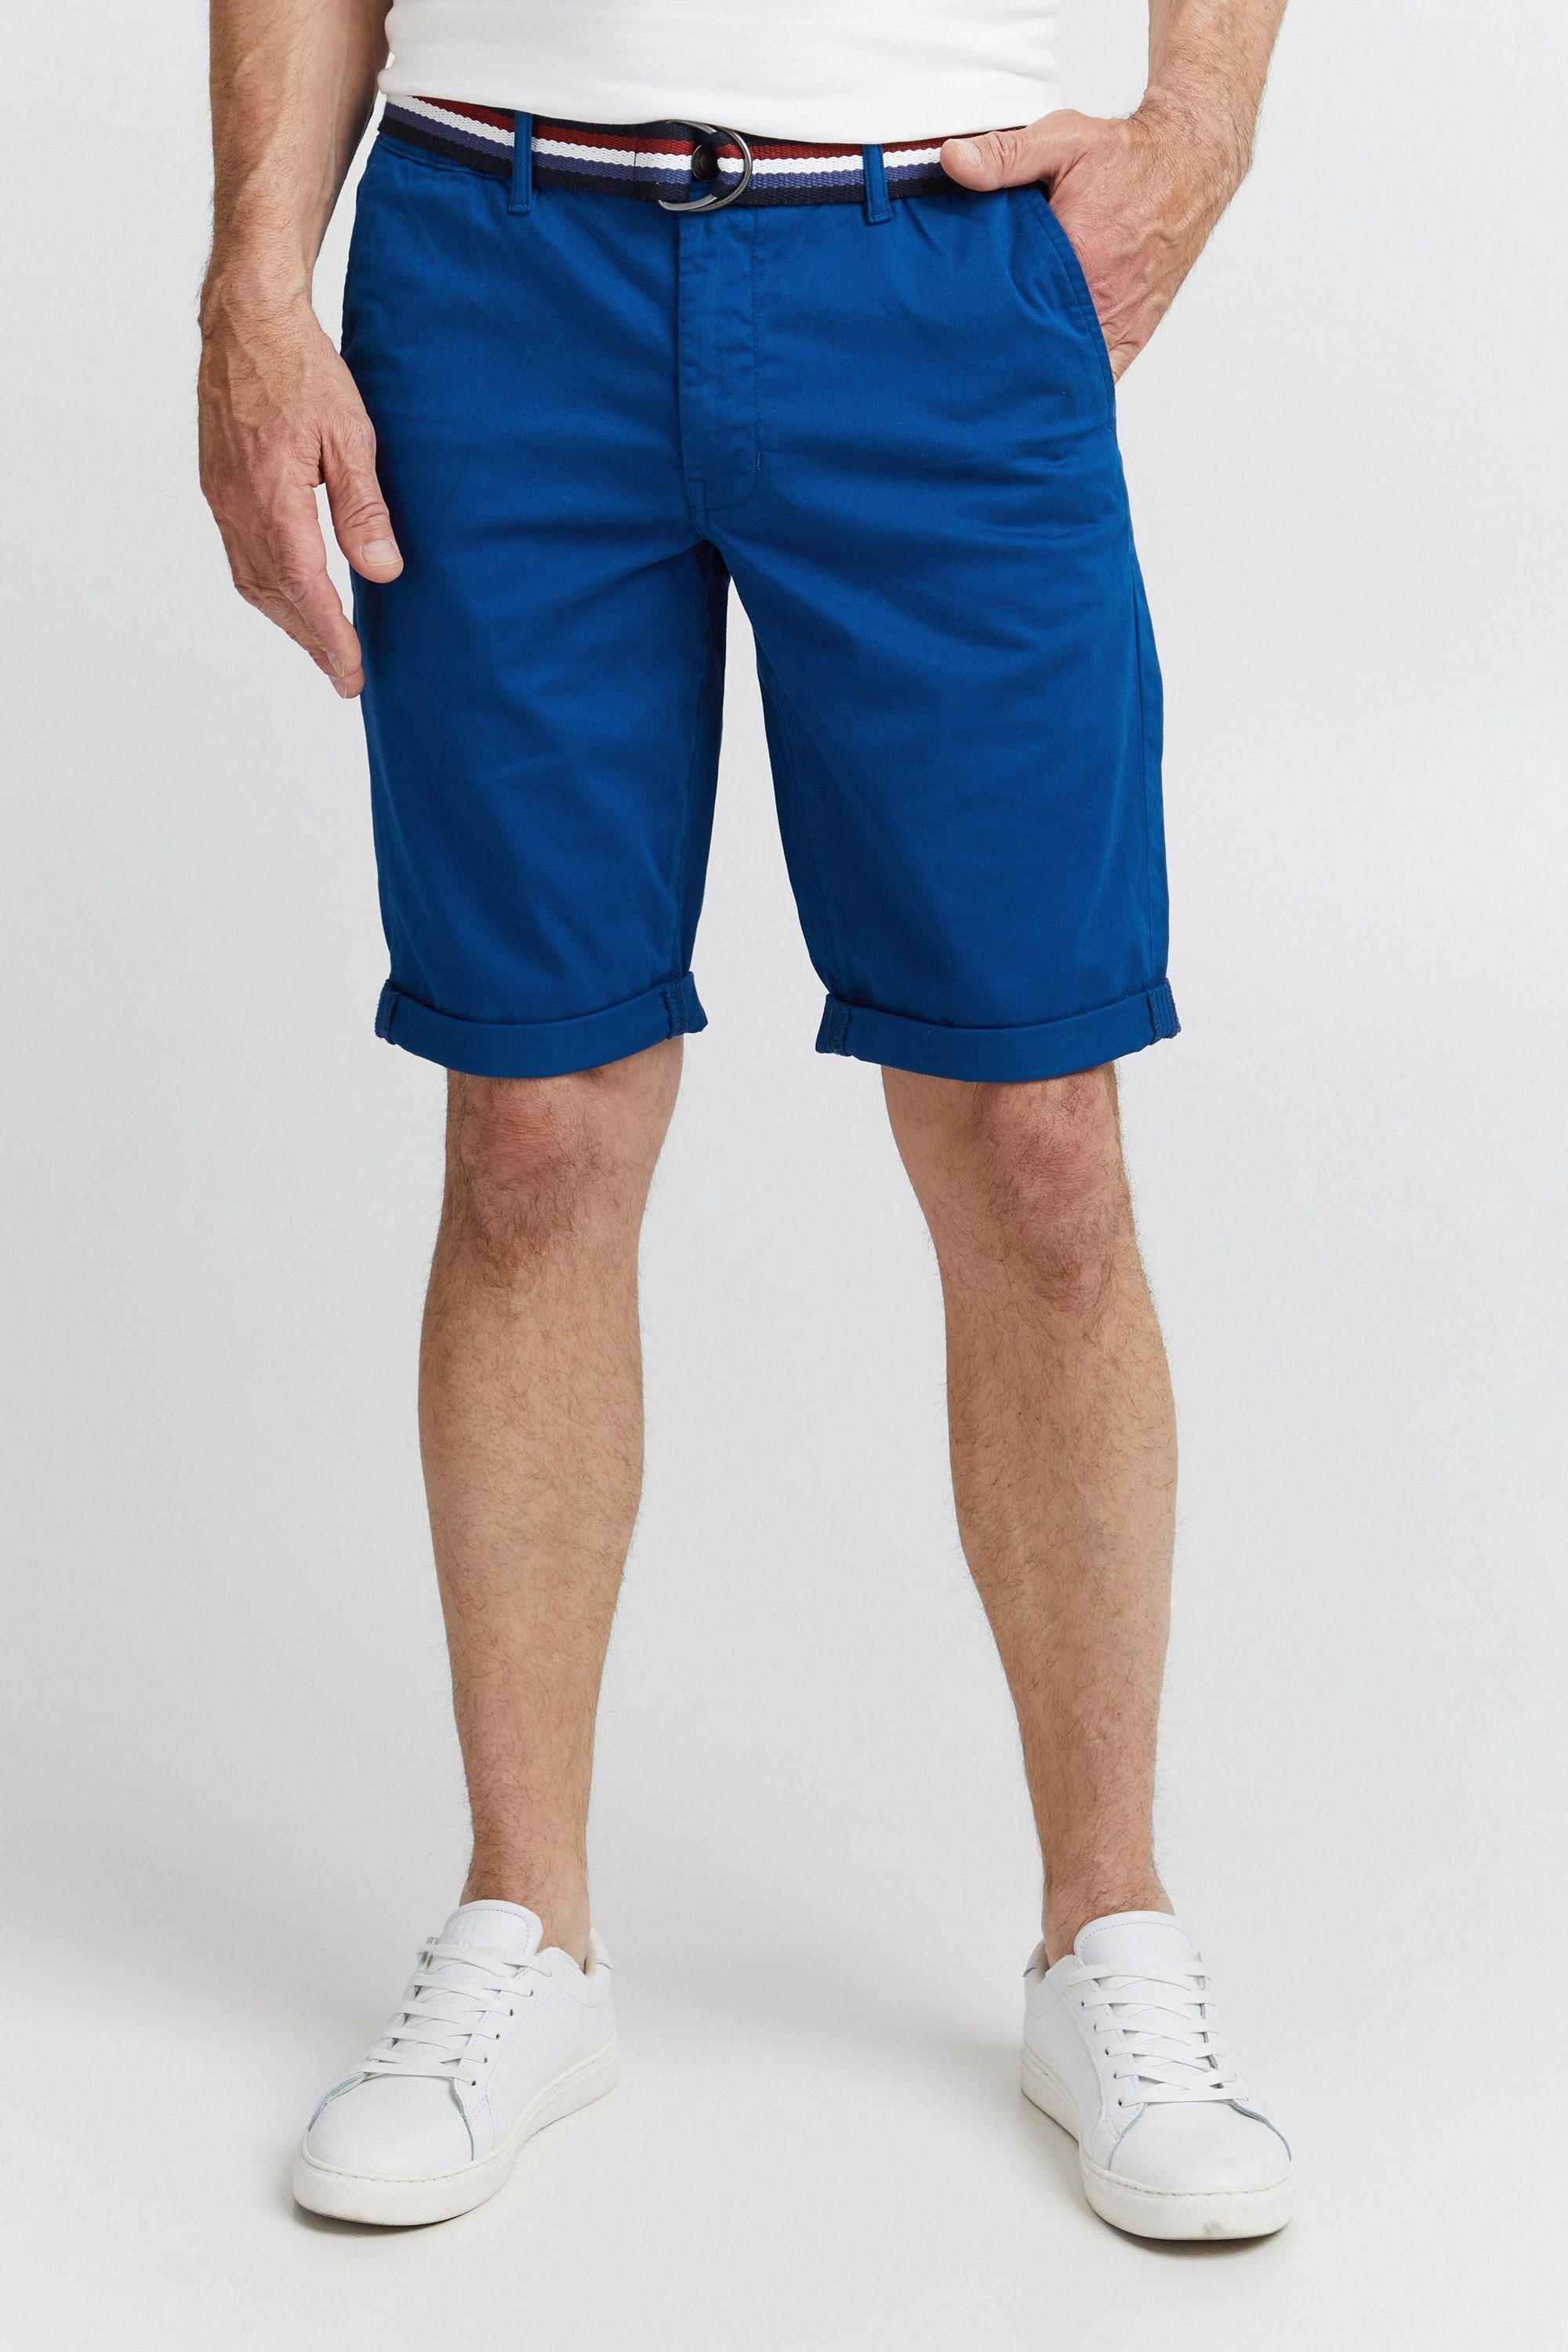 FQ1924 Peony FQRover FQ1924 Navy Chinoshorts